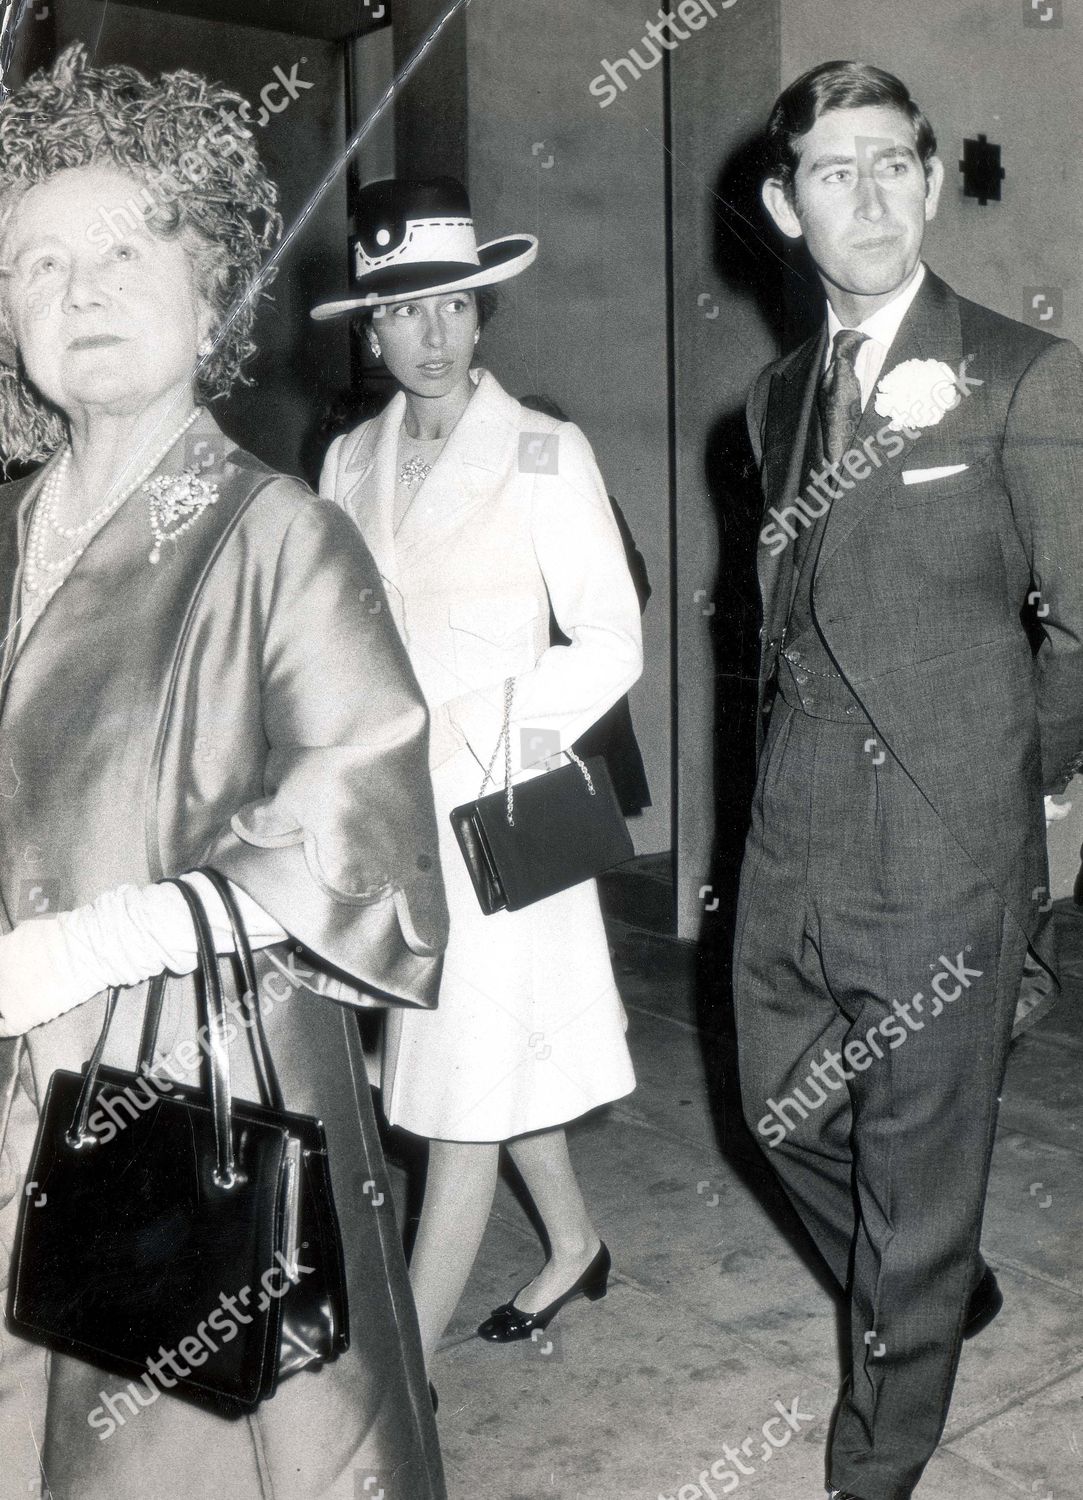 prince-of-wales-1972-1973-picture-shows-prince-charles-princess-anne-and-the-queen-mother-arriving-at-the-wellington-barracks-for-the-wedding-of-lord-ramsay-and-marilyn-butter-shutterstock-editorial-892304a.jpg